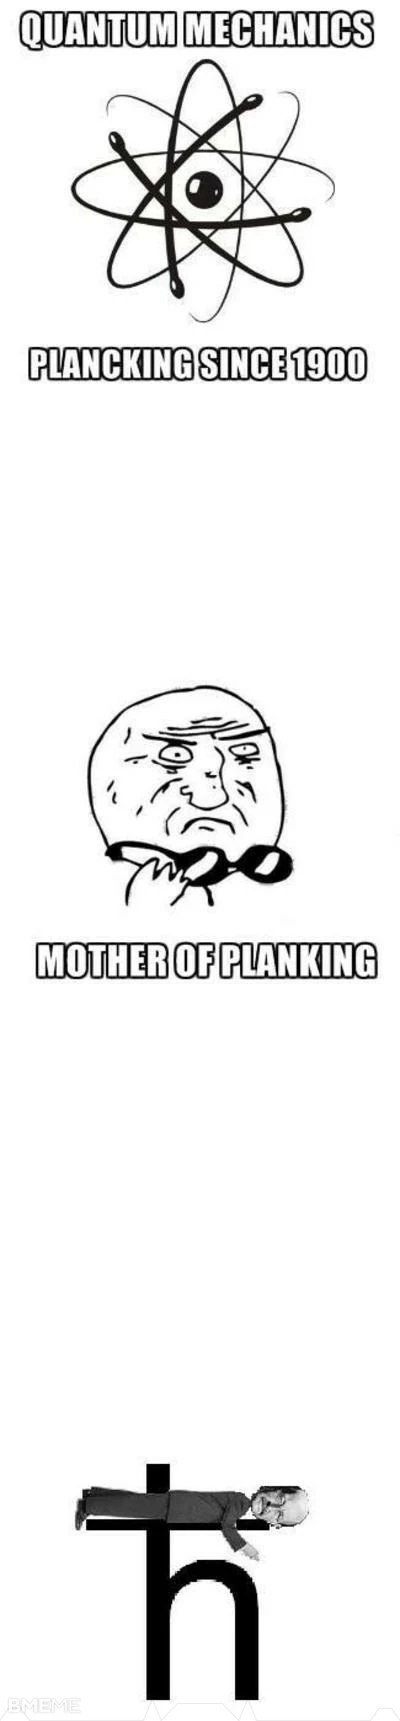 Mother of planking